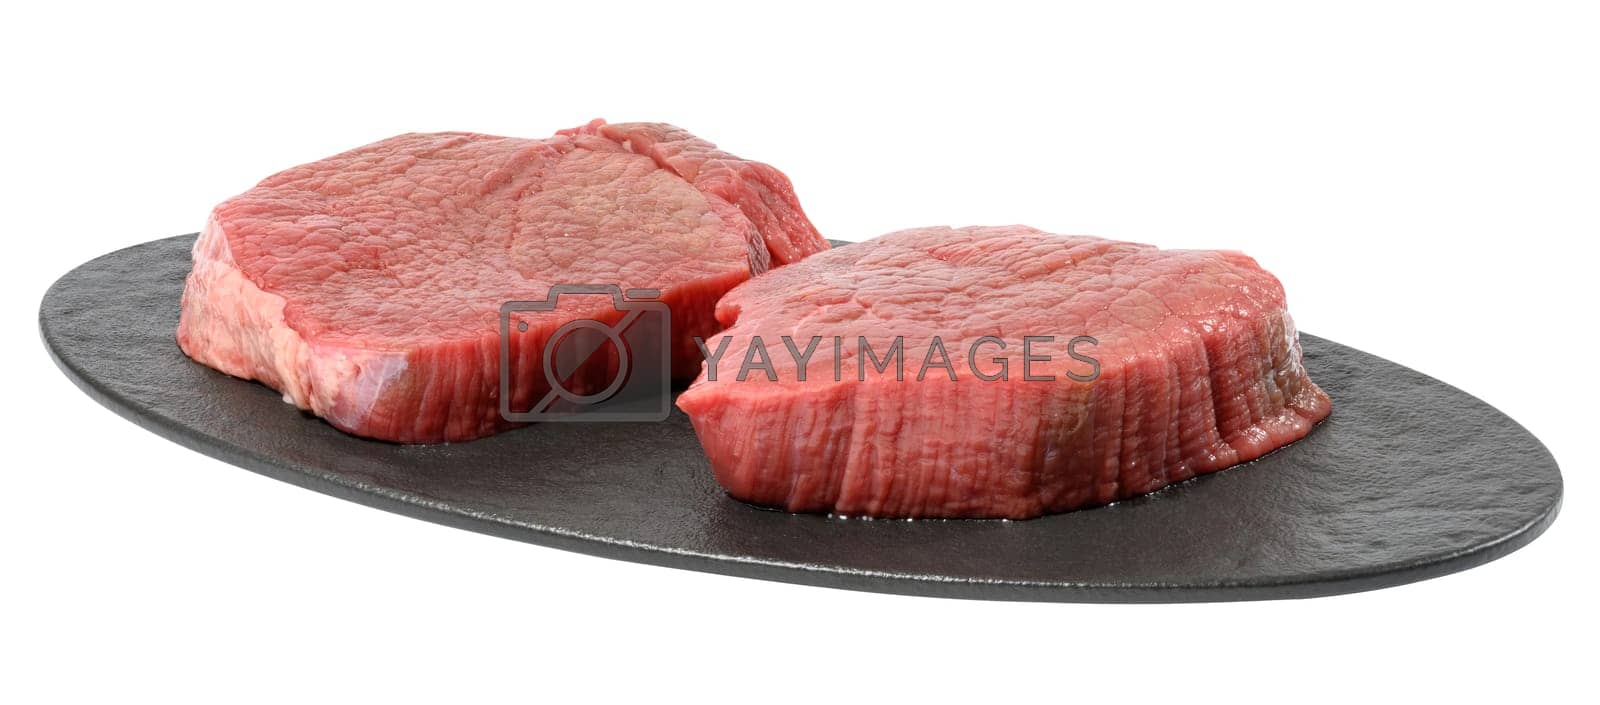 Royalty free image of Two round raw beef steak on a black oval cutting board, white isolated background by ndanko